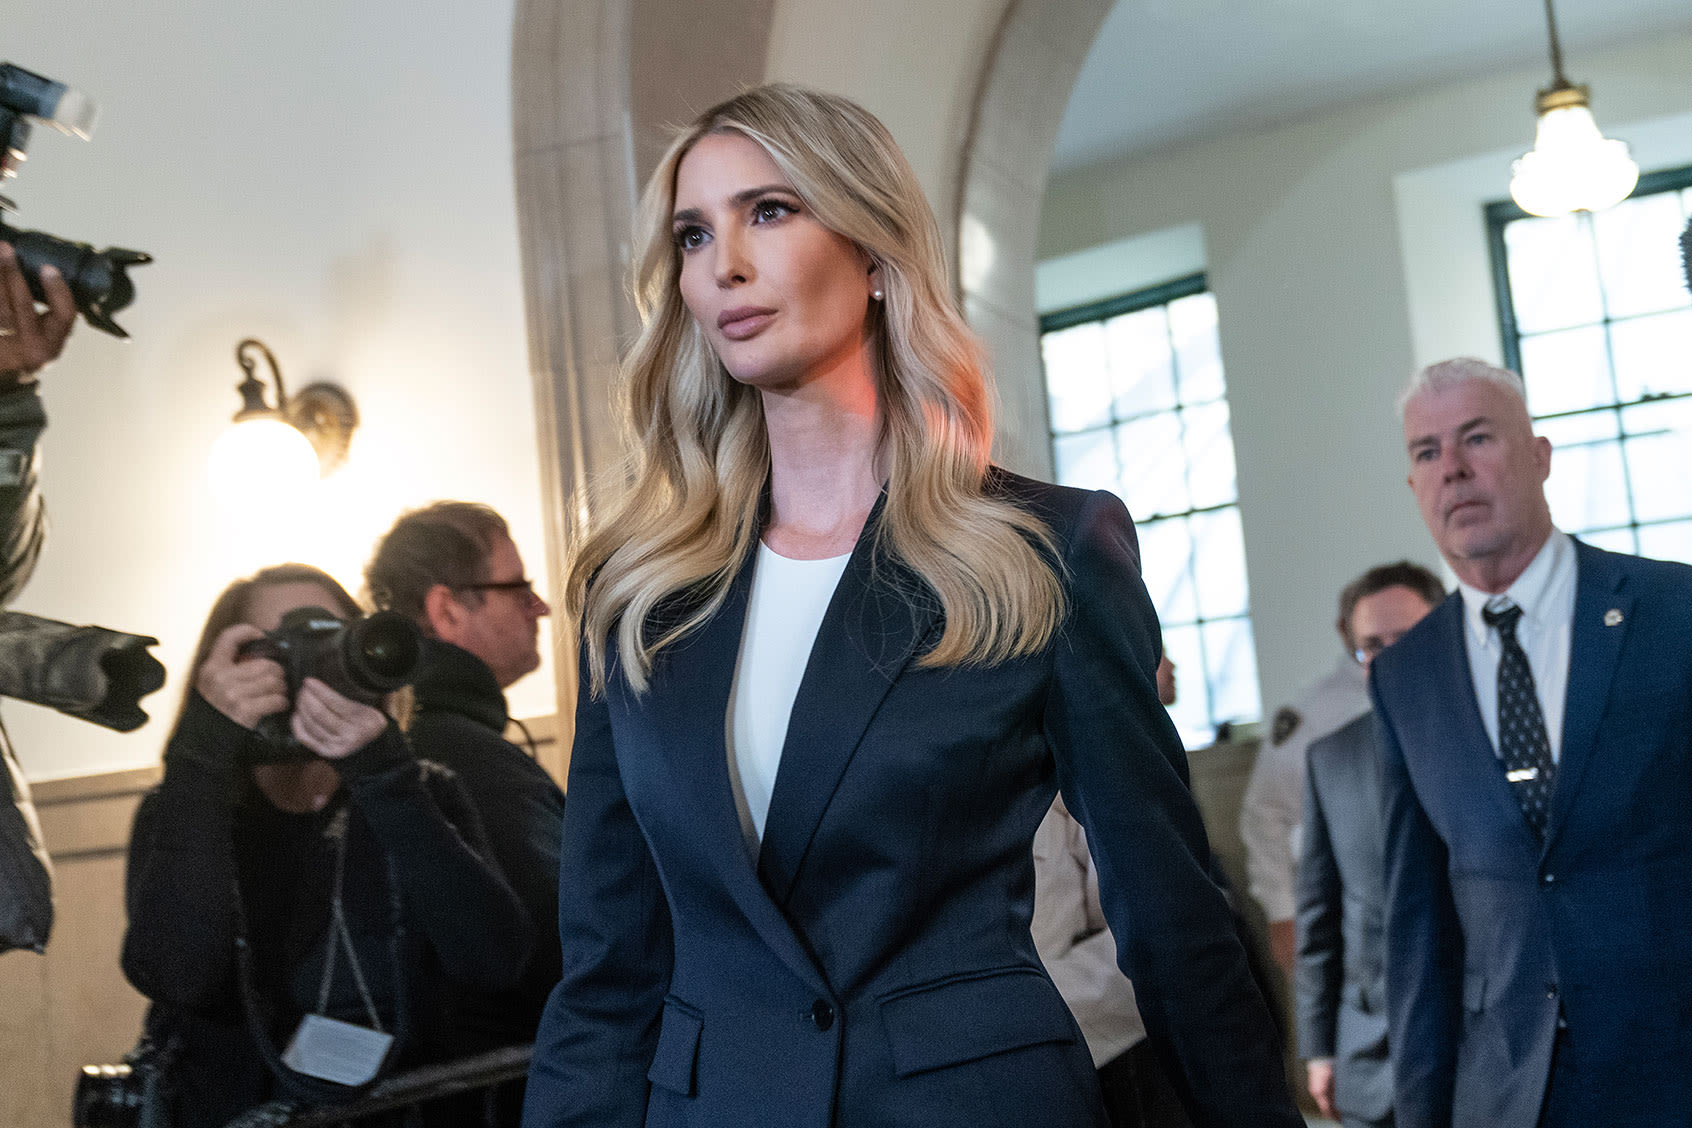 Ivanka Trump had little to say after her father was convicted, while Melania remained totally silent